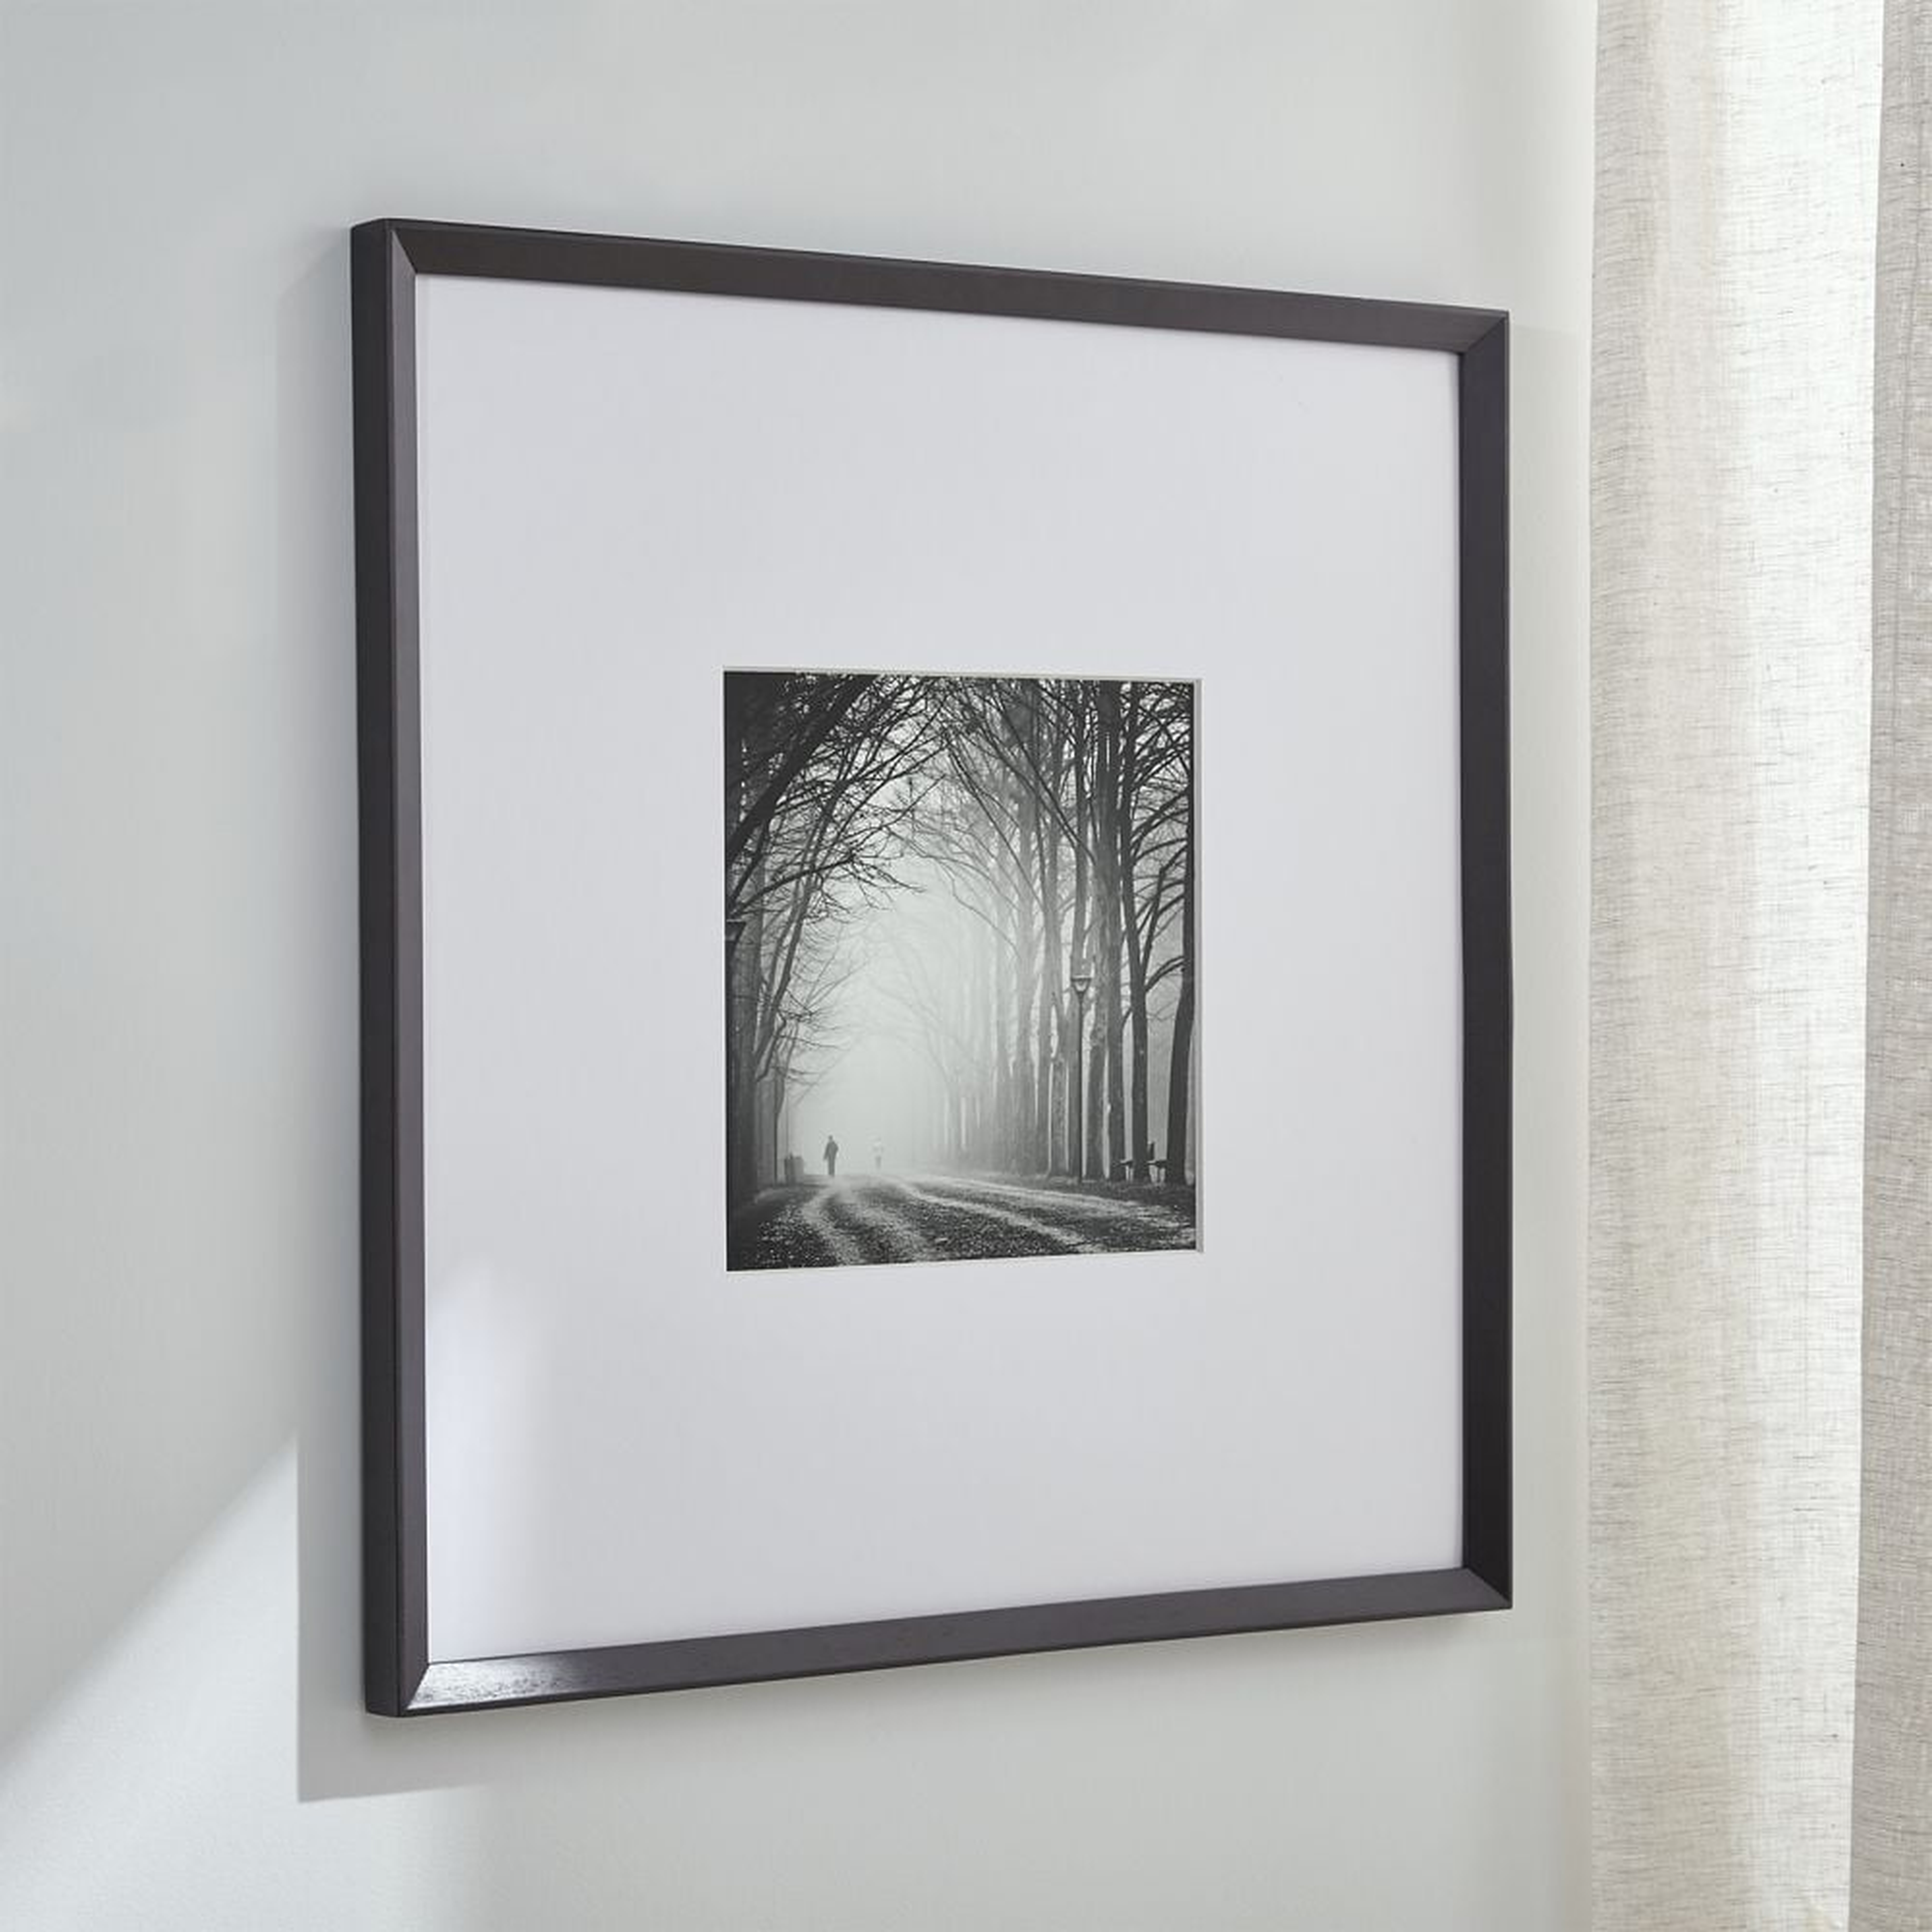 Icon Wood 11x11 Black Picture Frame - Crate and Barrel